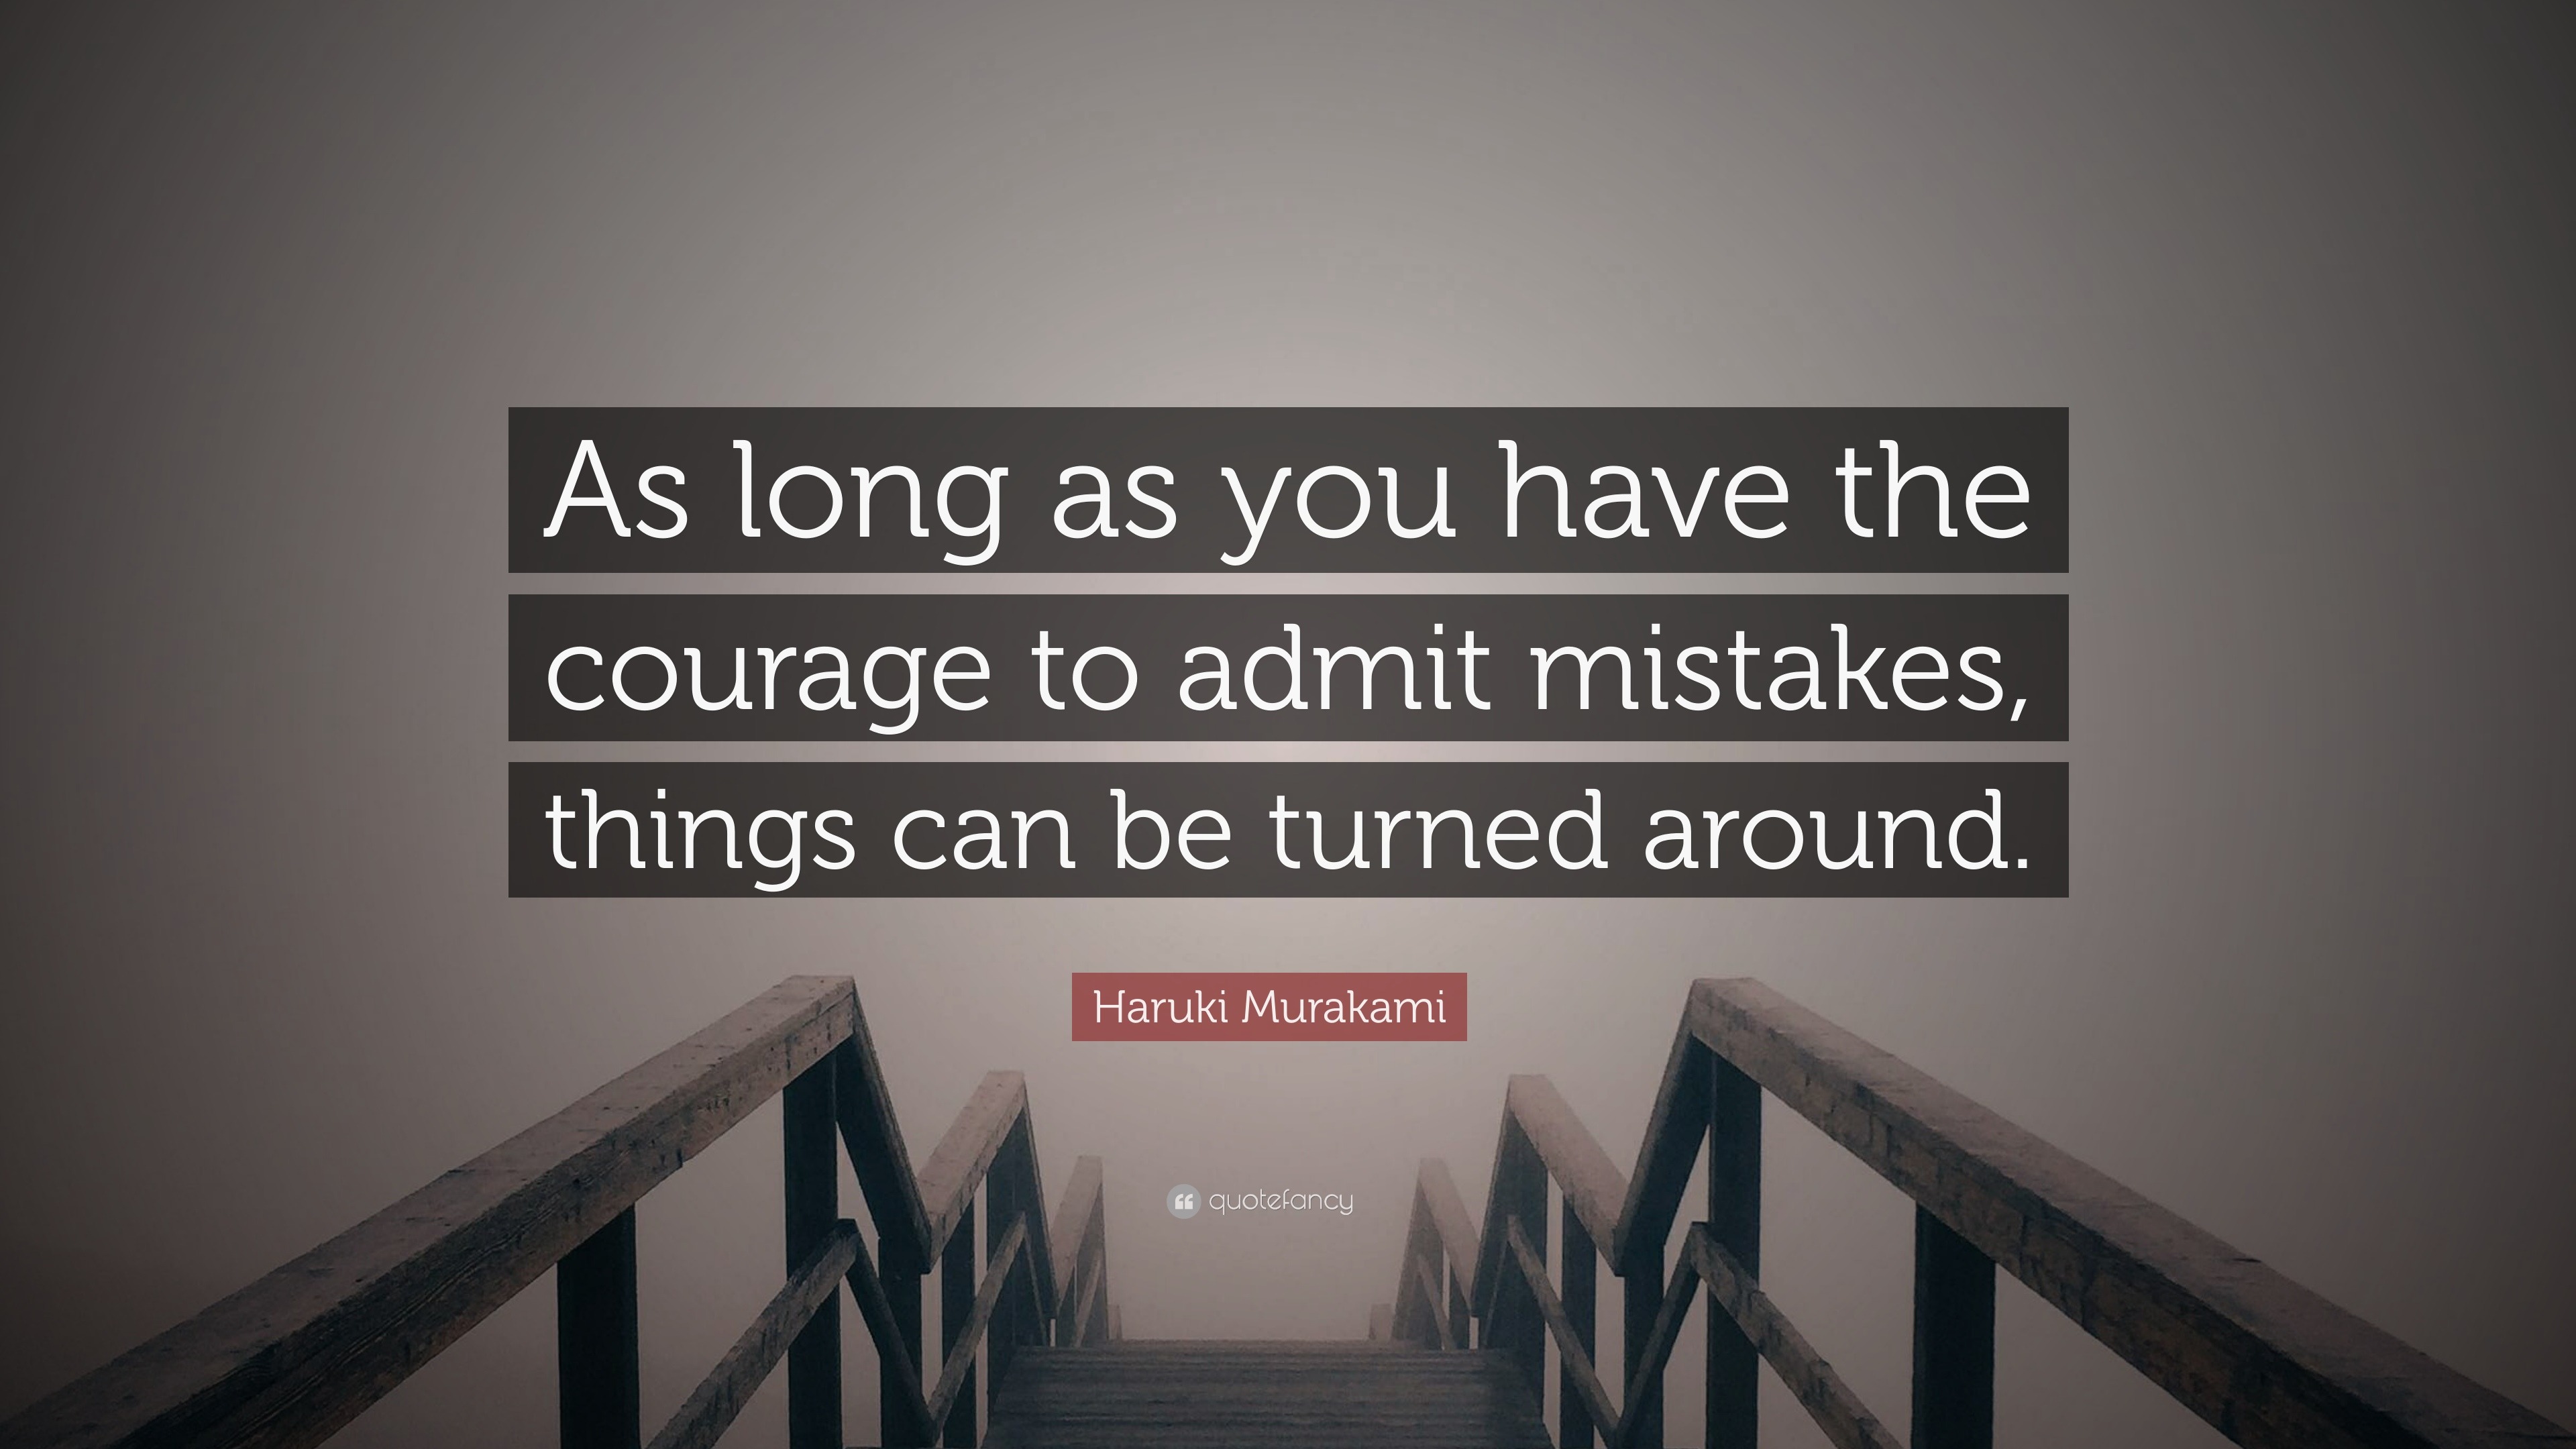 Mistake Quotes (40 wallpapers) - Quotefancy